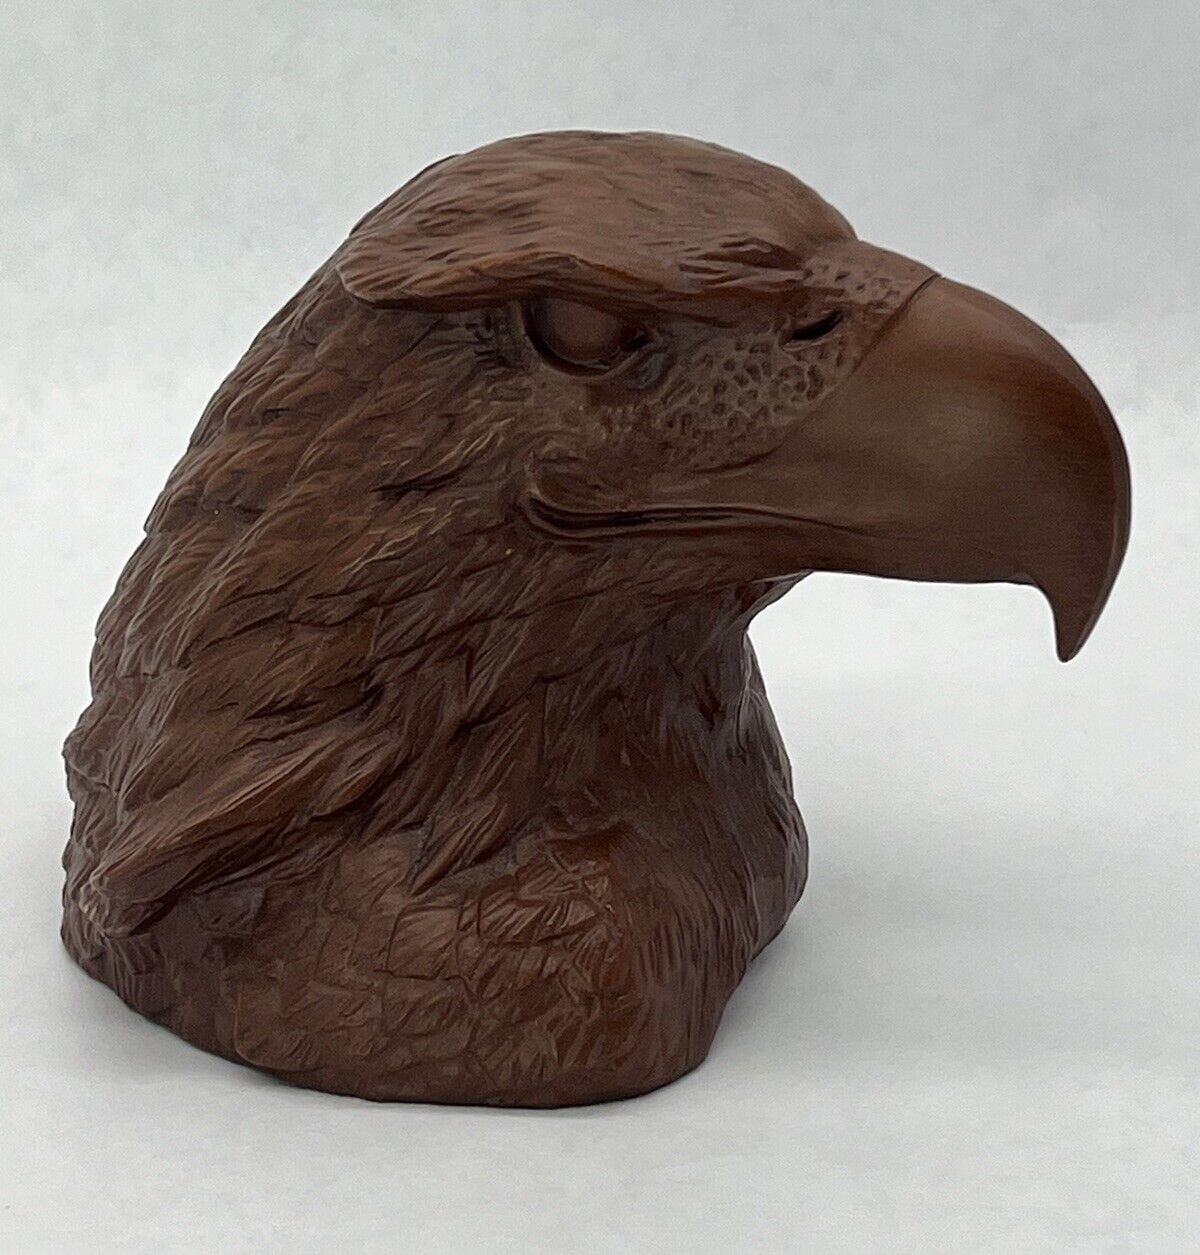 Red Mill Mfg. Hand Crafted USA Majestic Eagle Bust 1990 Crushed Pecan Resin